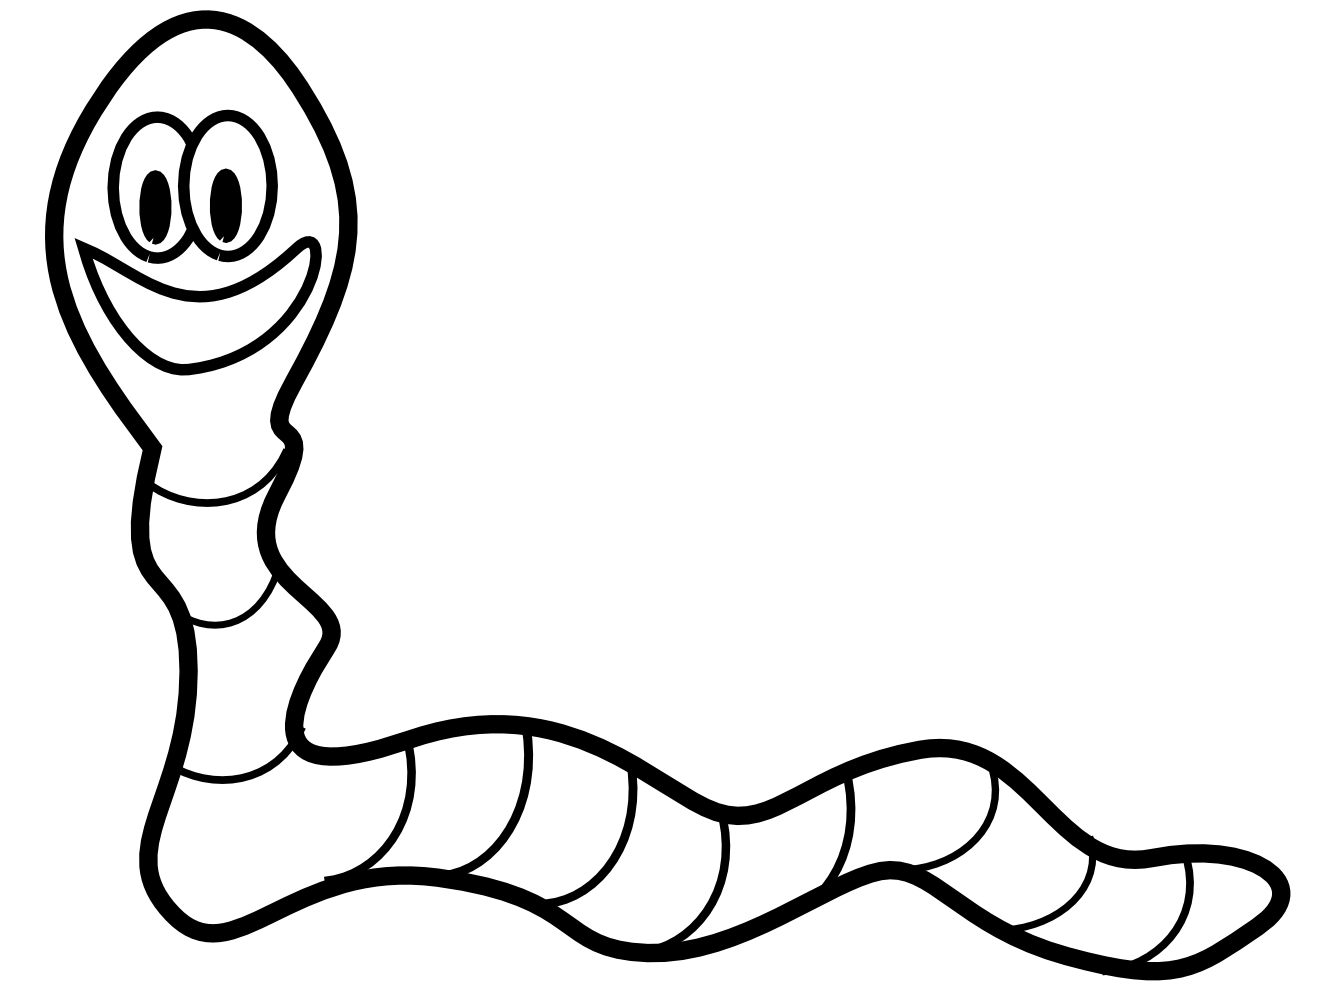 inchworm coloring page - Clip Art Library